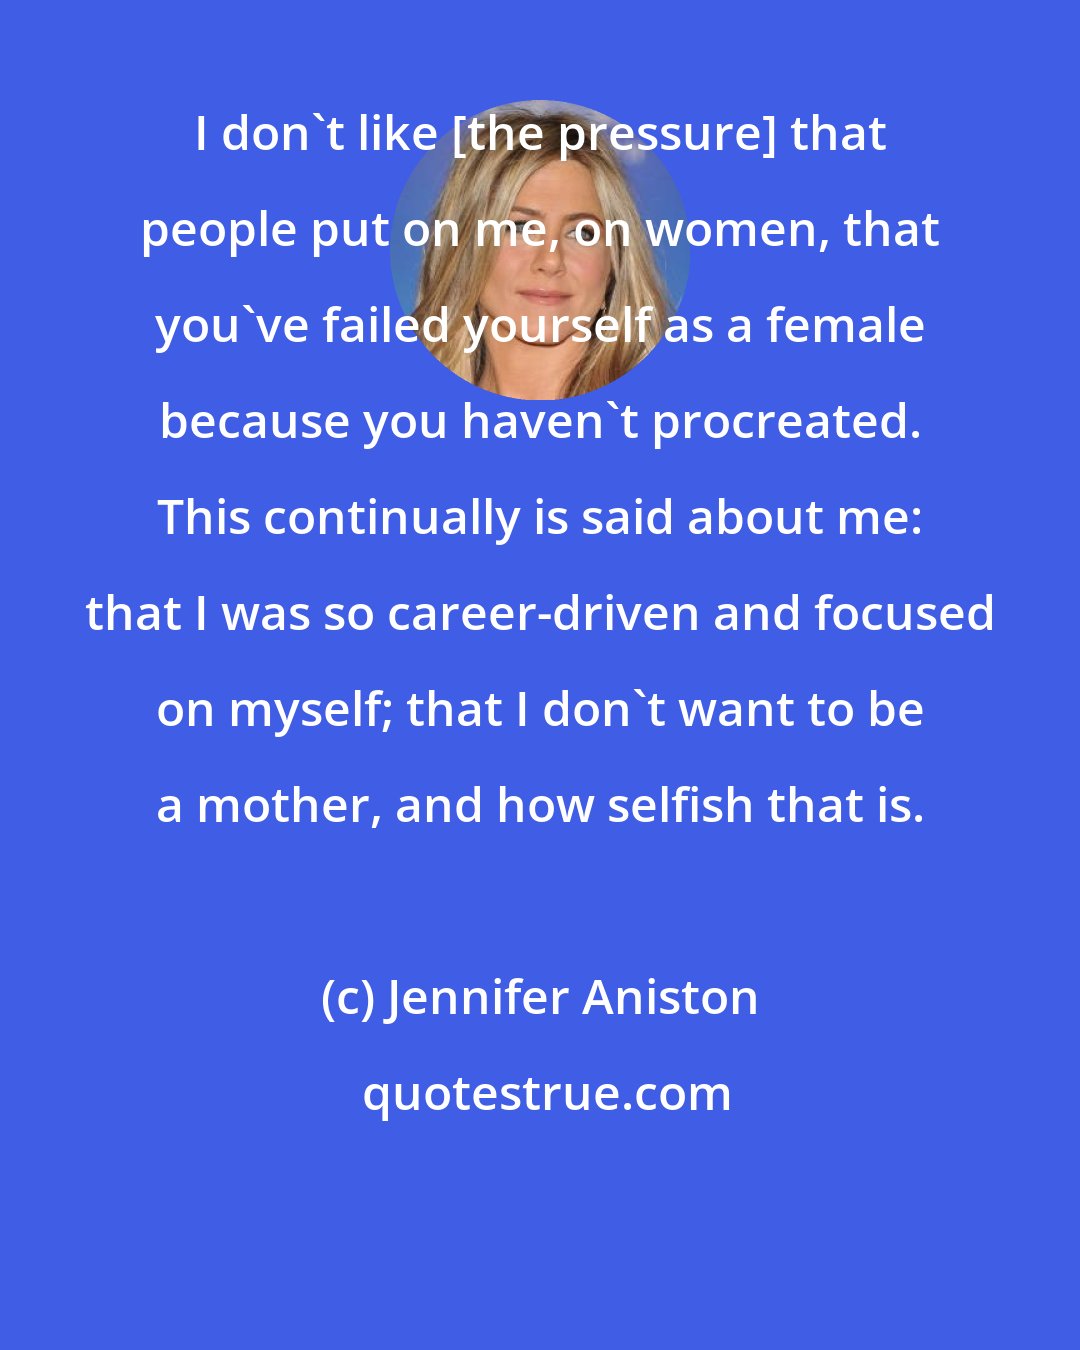 Jennifer Aniston: I don't like [the pressure] that people put on me, on women, that you've failed yourself as a female because you haven't procreated. This continually is said about me: that I was so career-driven and focused on myself; that I don't want to be a mother, and how selfish that is.